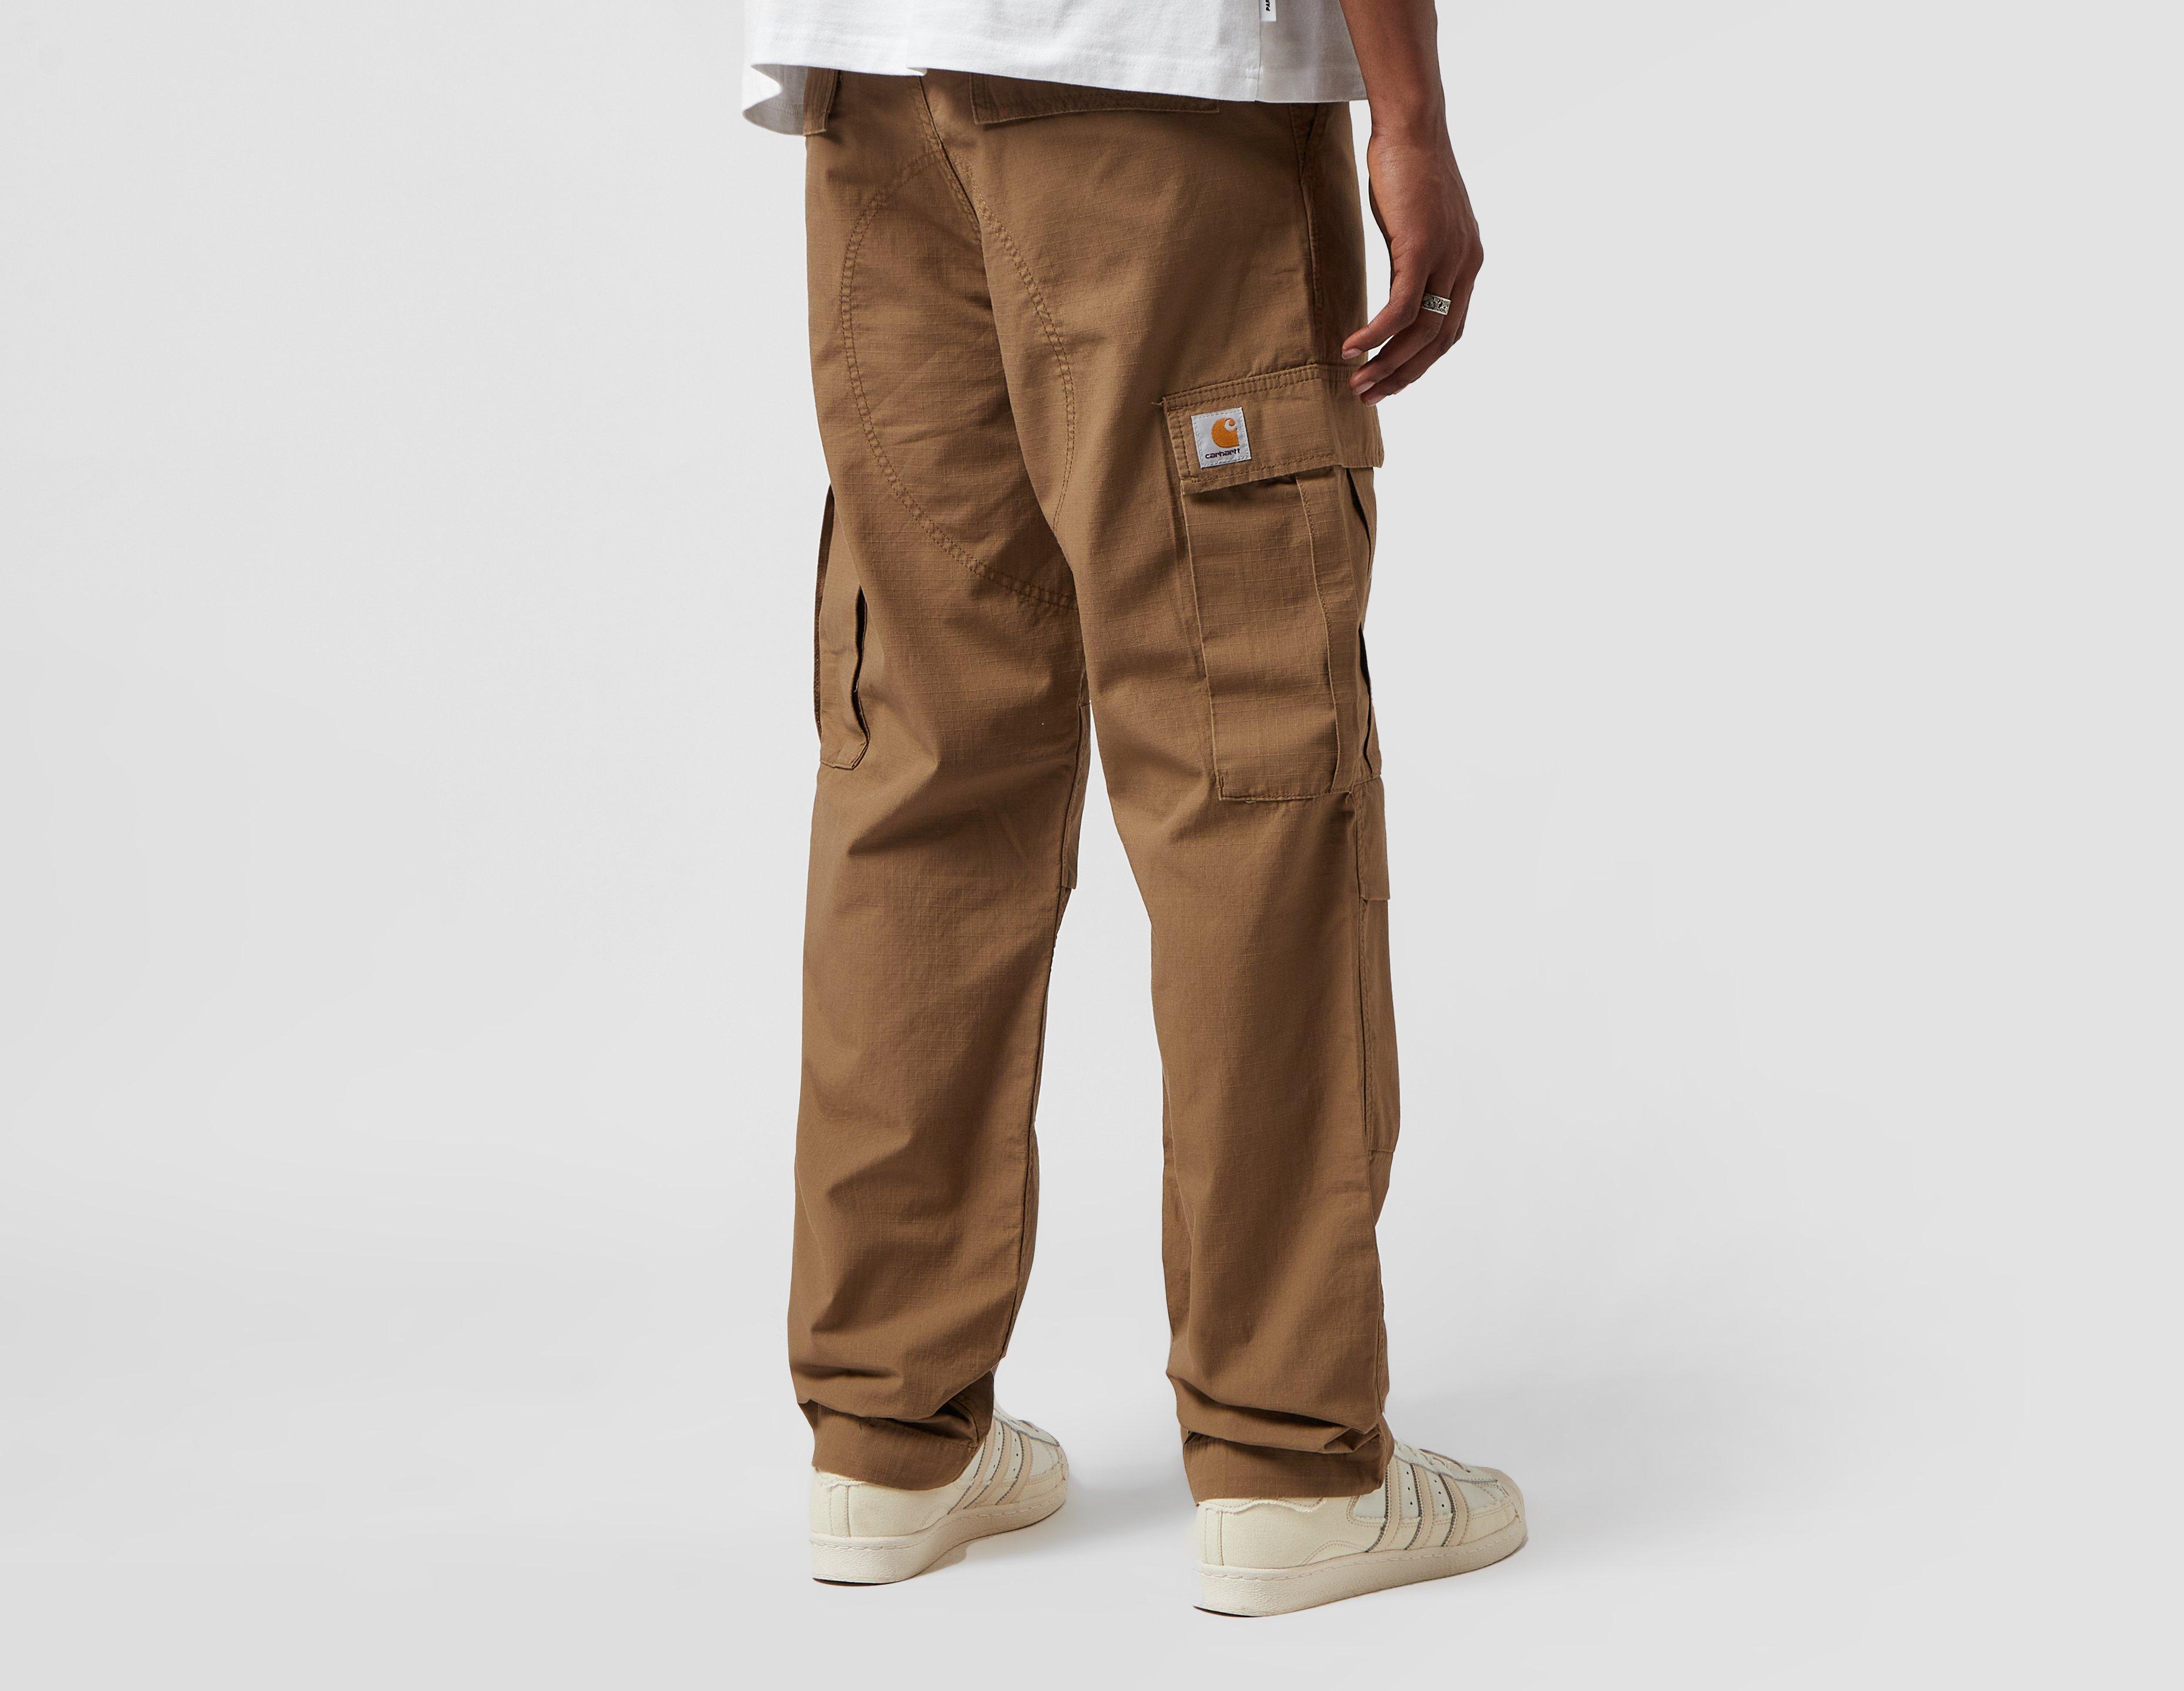 Carhartt men's pants - clothing & accessories - by owner - apparel